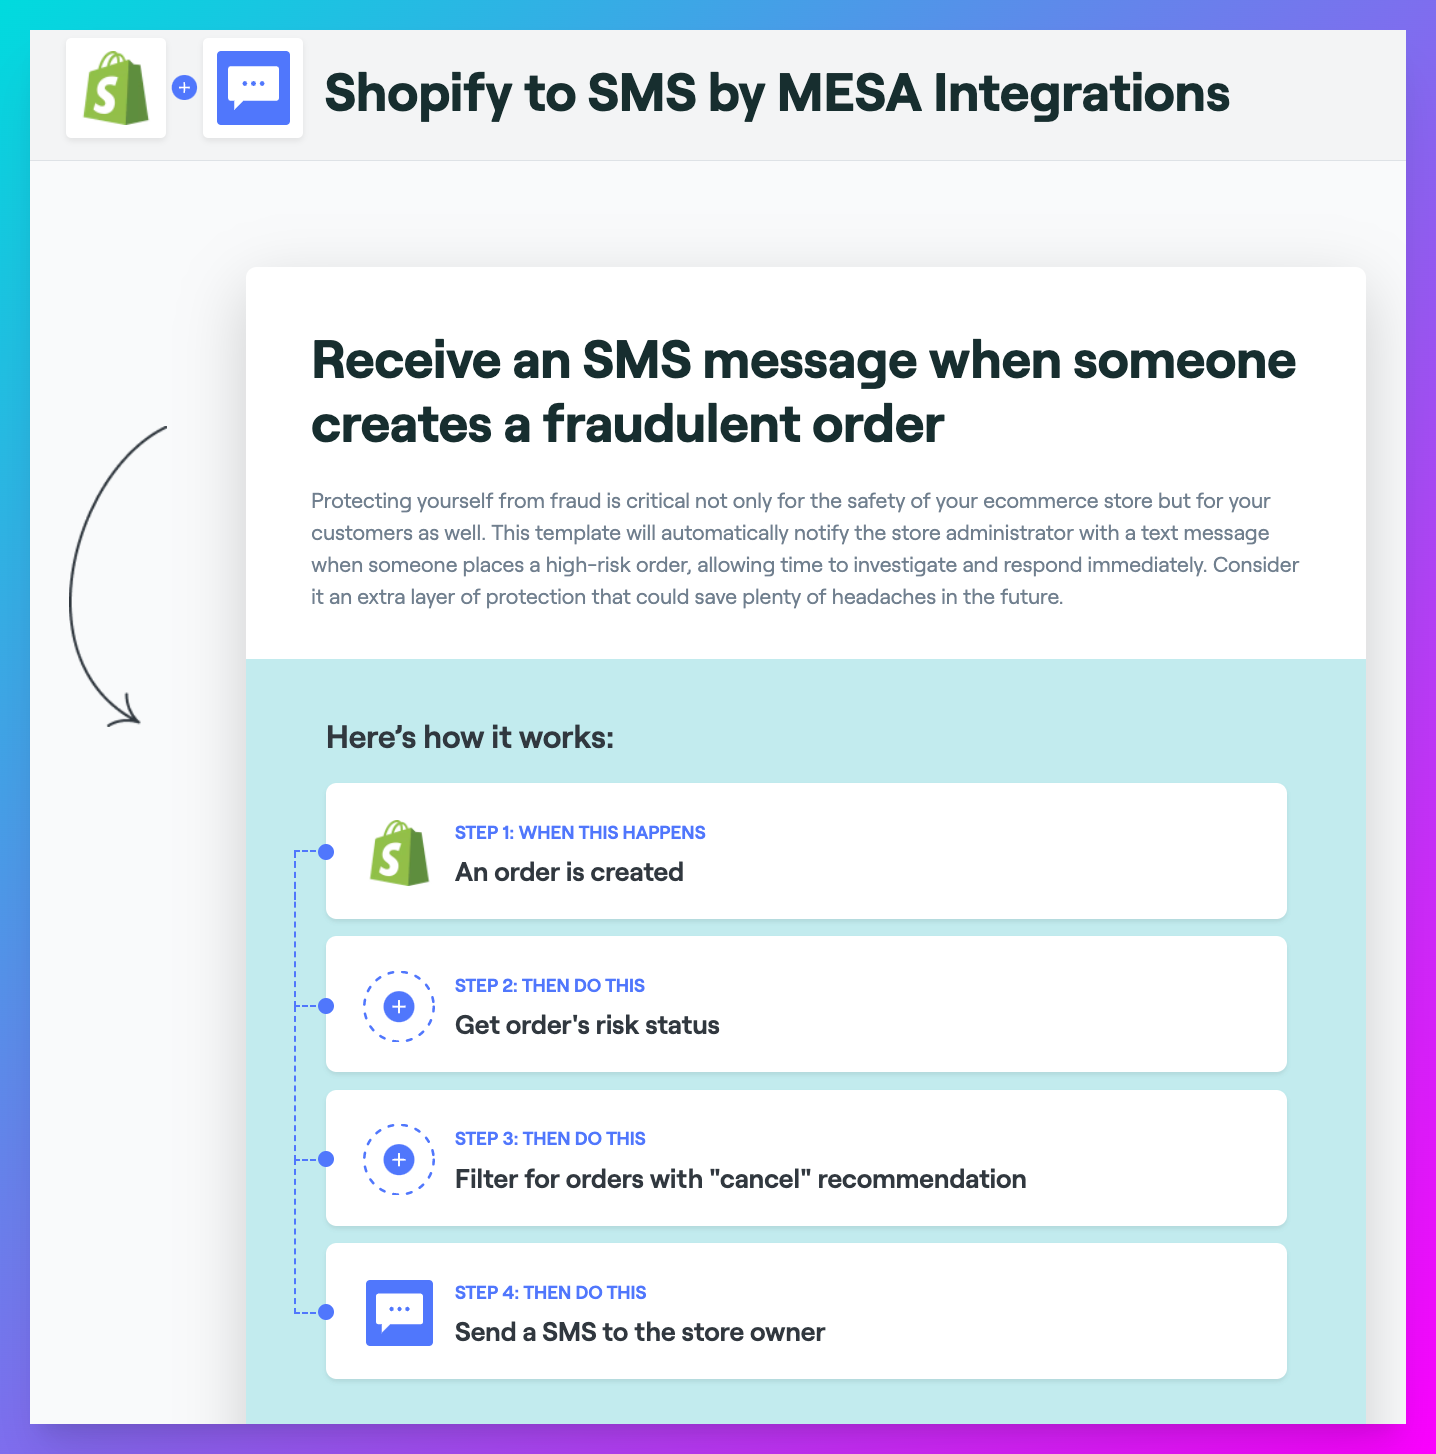 Receive an SMS when someone creates a fraudulent order